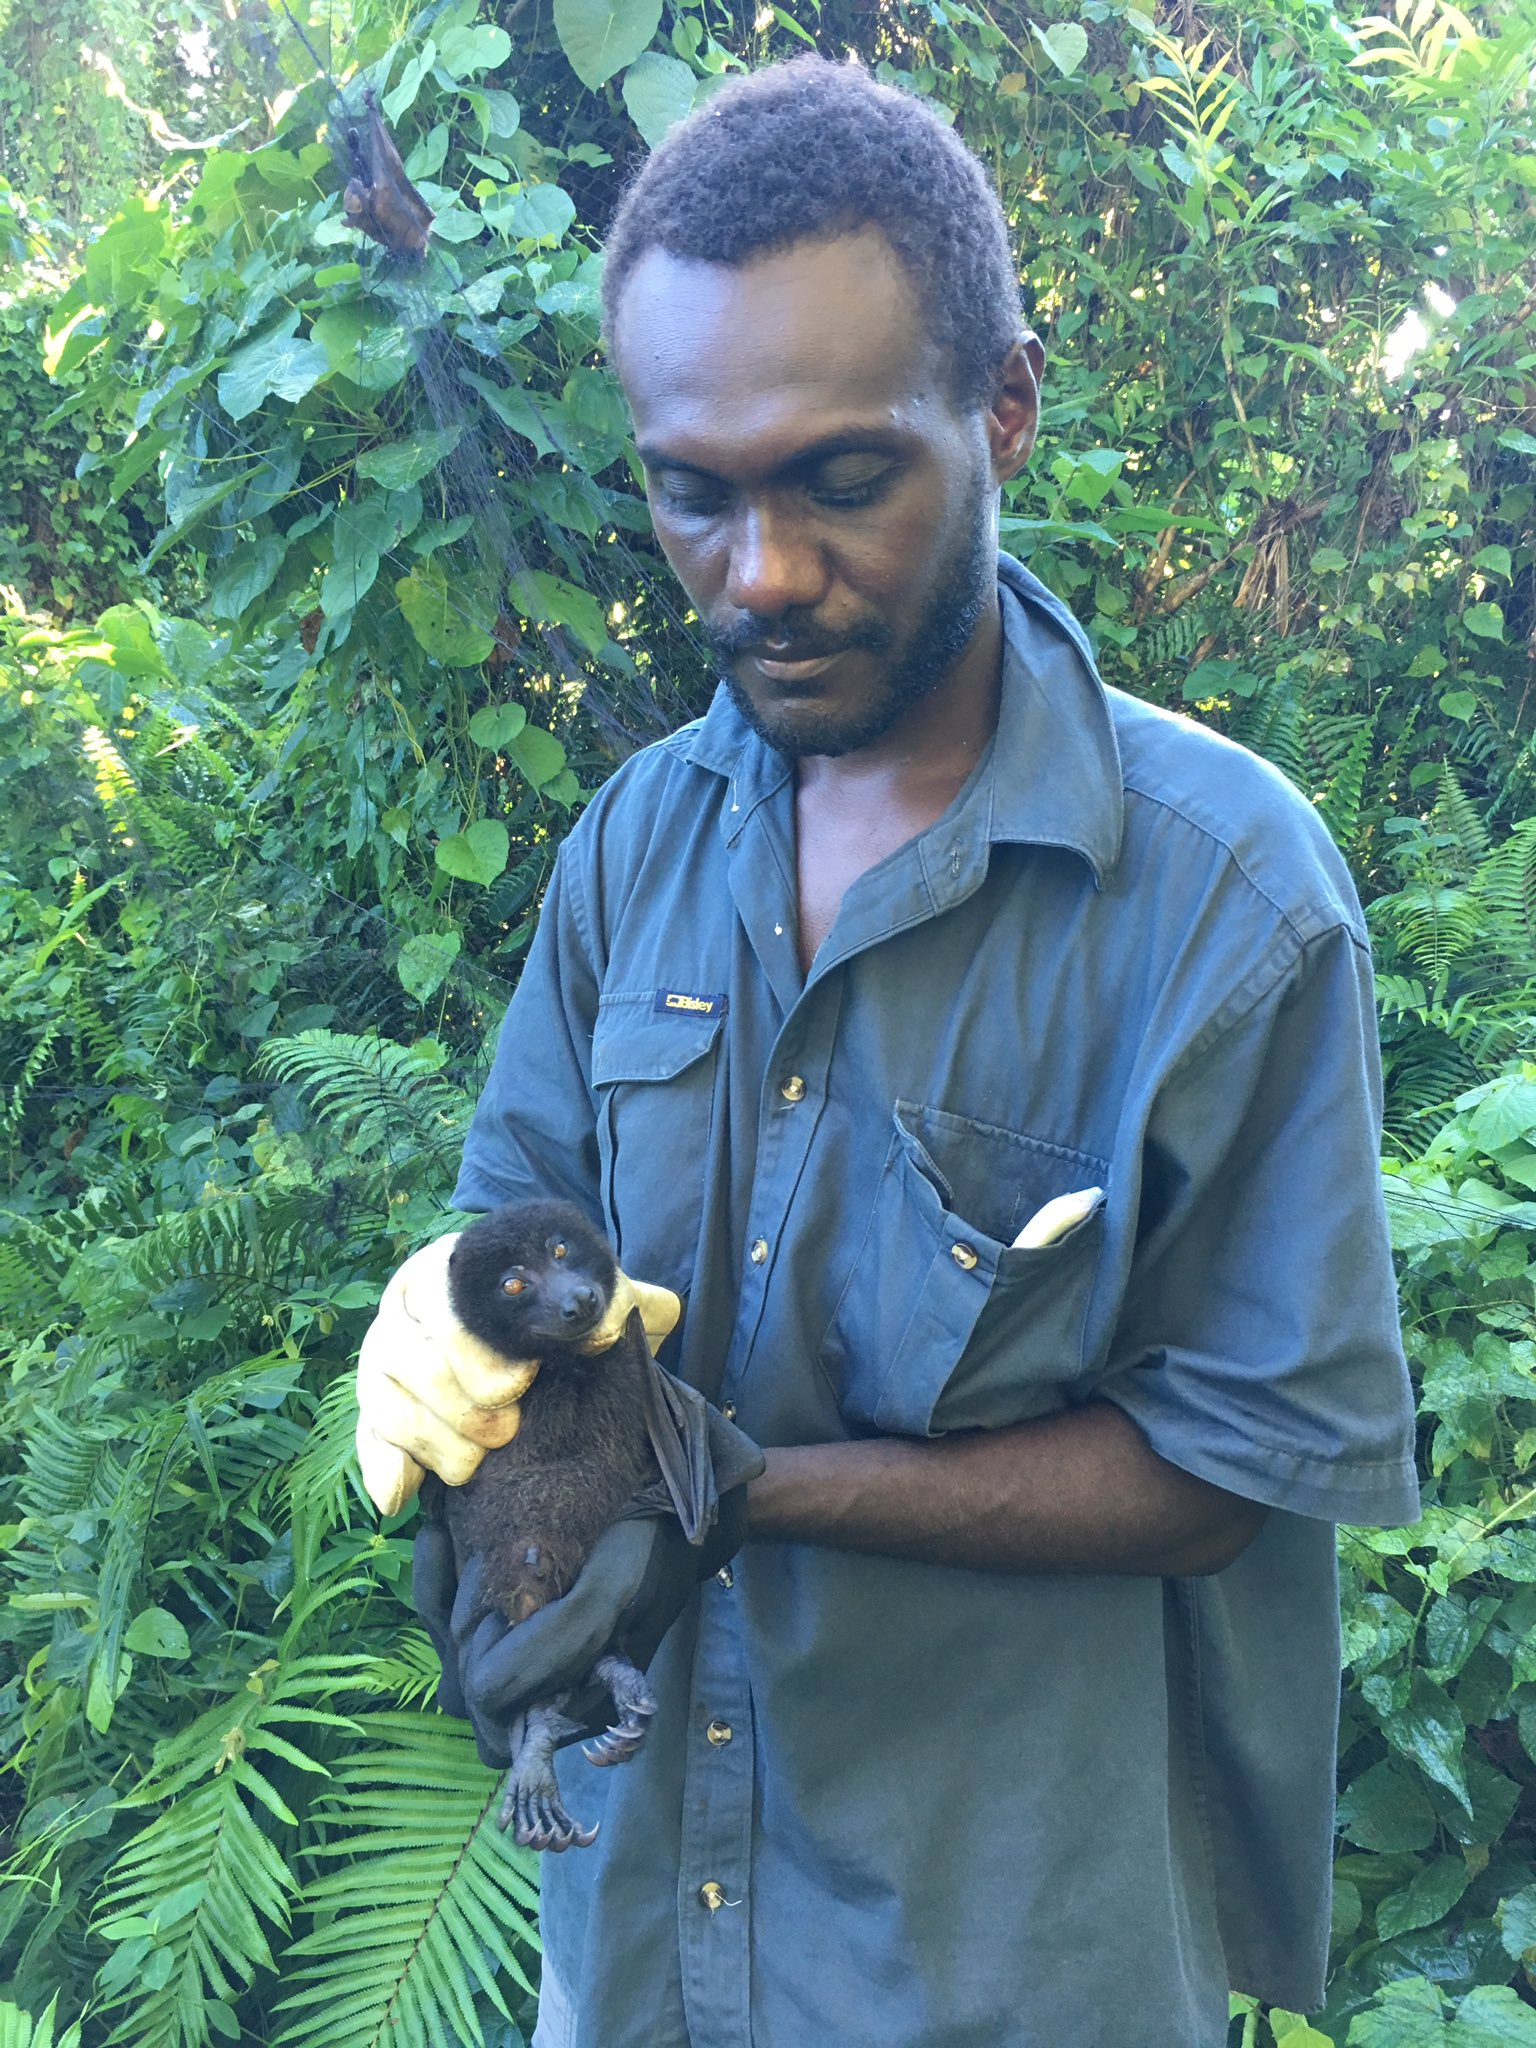 Tyrone Lavery and Cornelius (holding the bat) responsible for conservation of the Bougainville Monkey-faced bats. Via Twitter https://twitter.com/TyroneLavery/status/827301185249898497?s=20